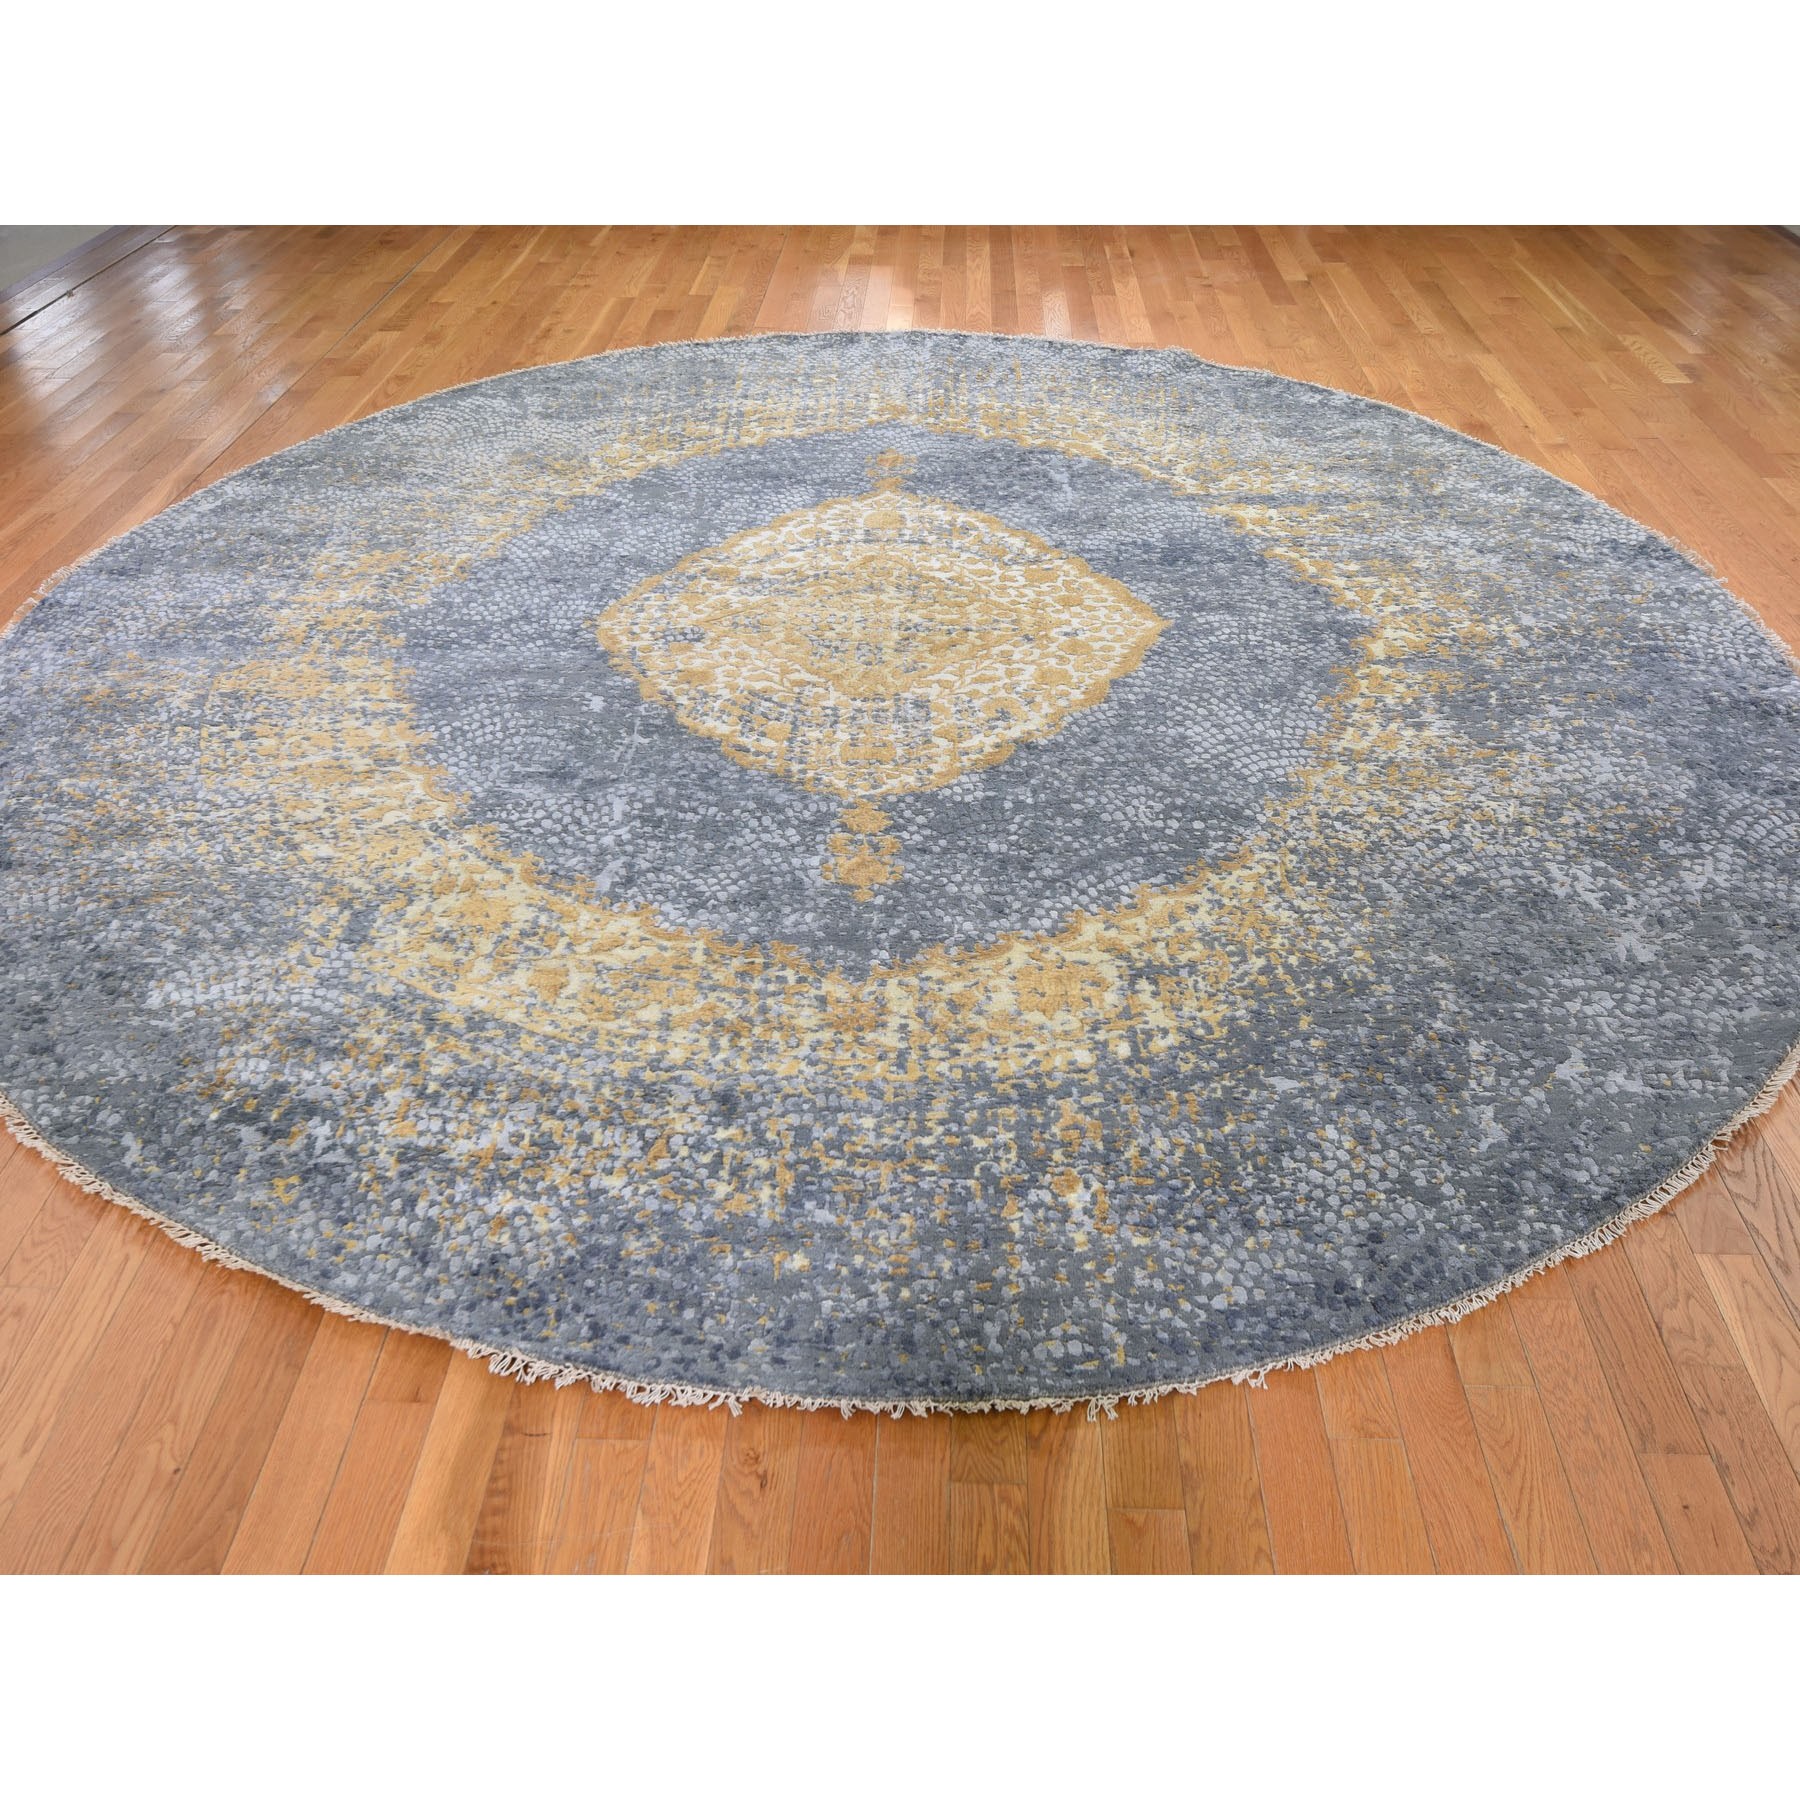 11-10 x11-10  Round Gold Persian Design Wool And Pure Silk Hand Knotted Oriental Rug 